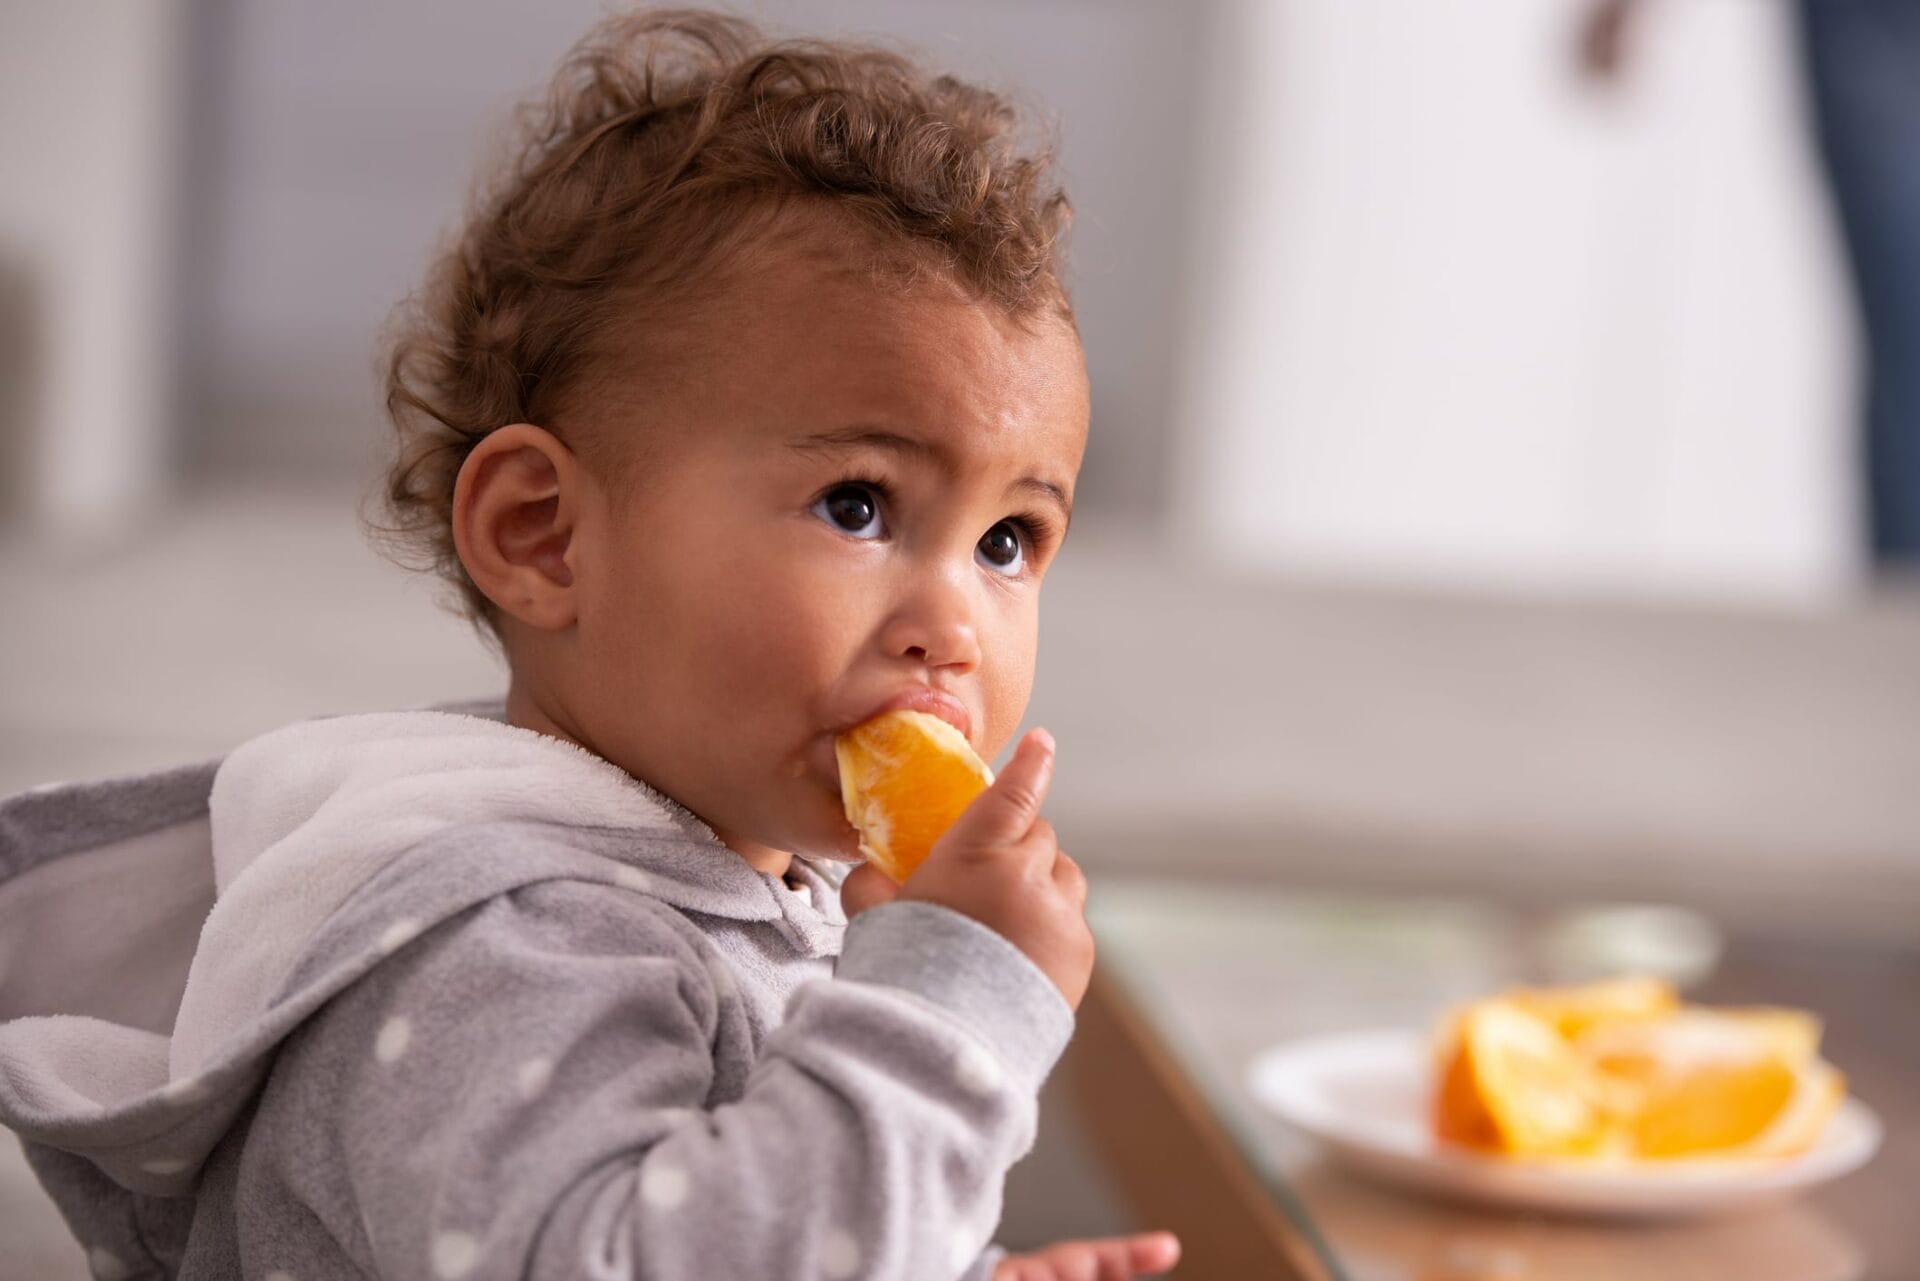 Infant and Toddler Feeding from Birth to 23 Months: Making Every